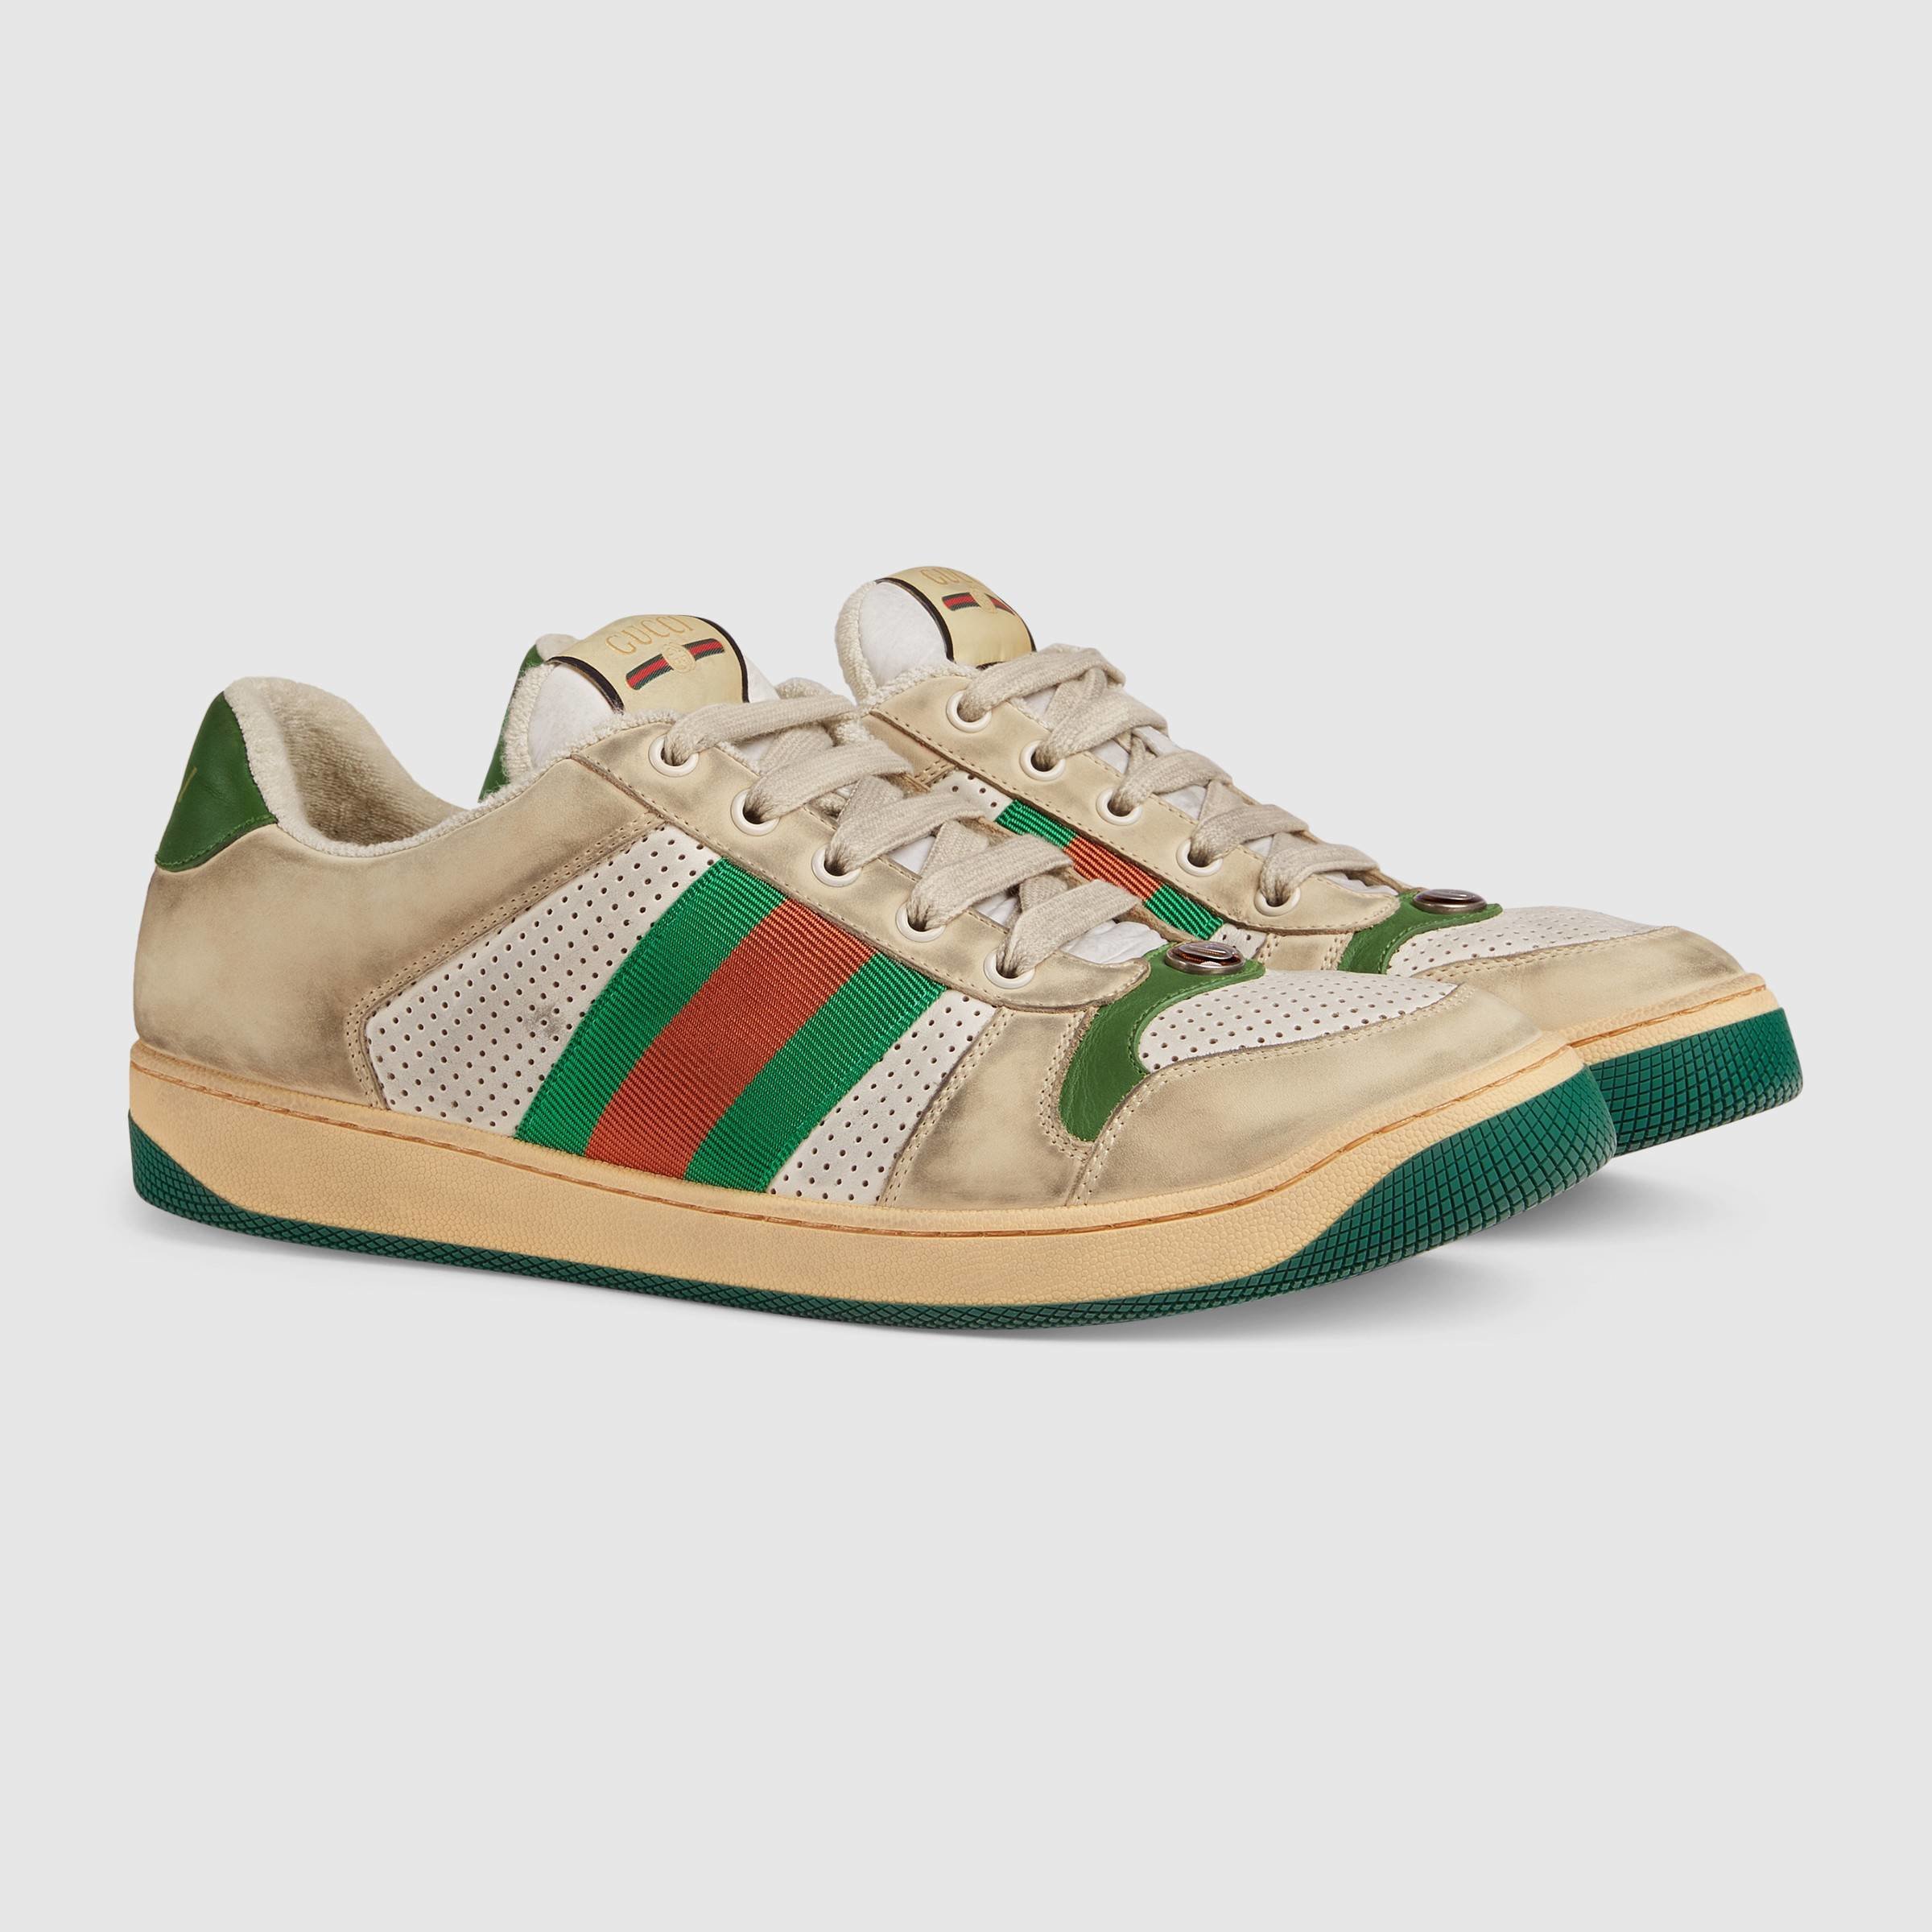 Gucci Wants You To Pay Almost $900 For 